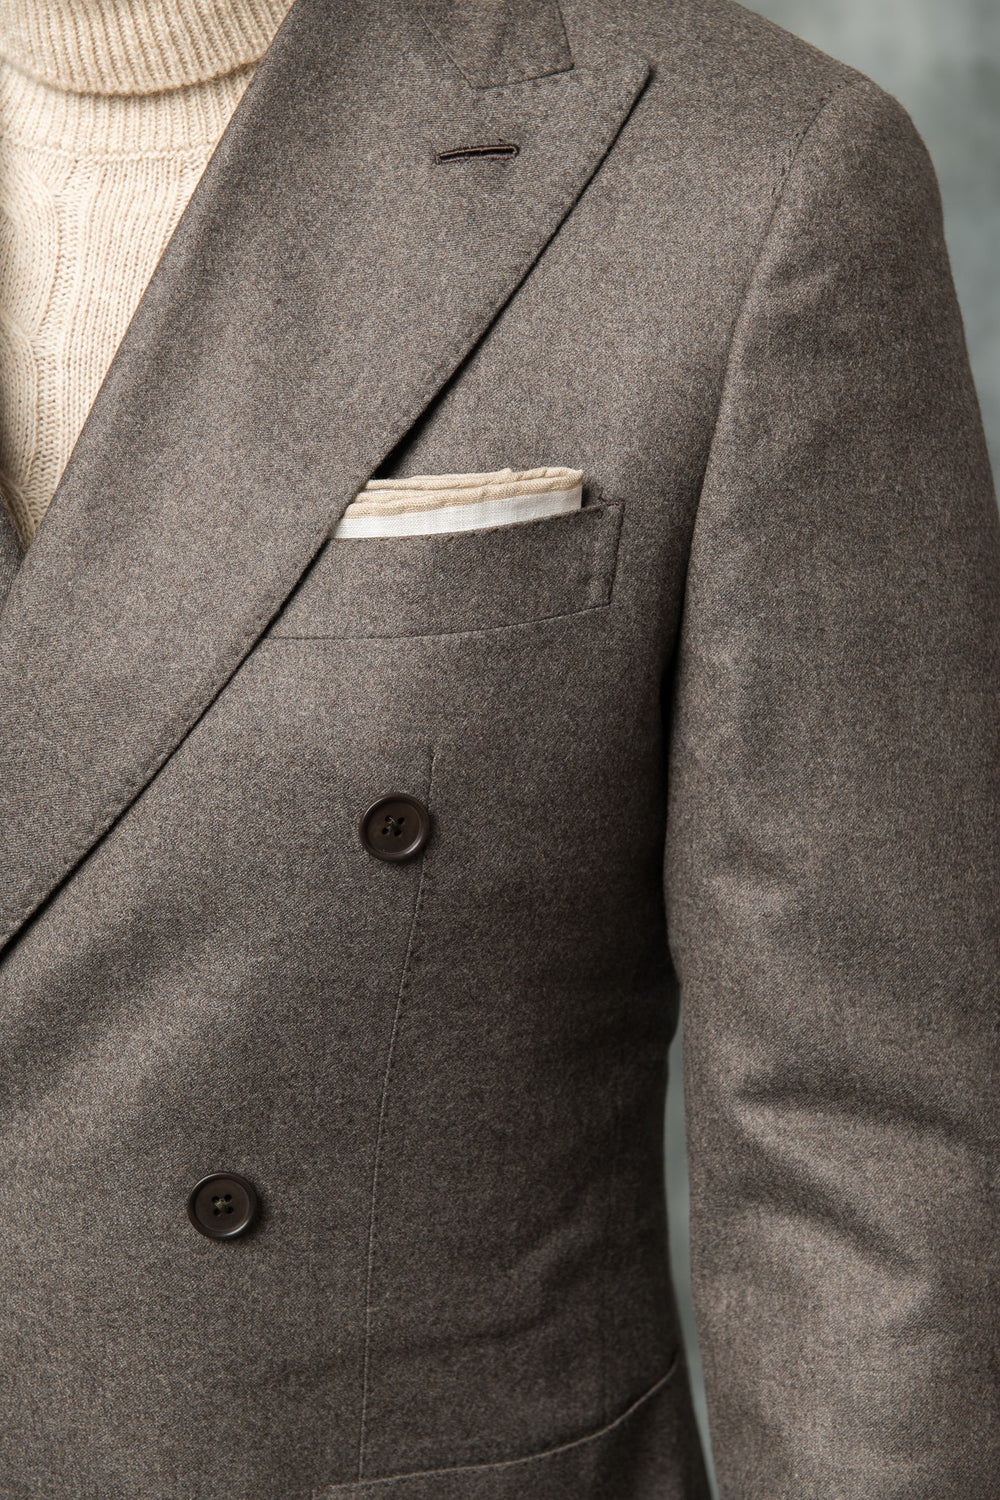 Brown double breasted suit | Made in Italy | Pini Parma